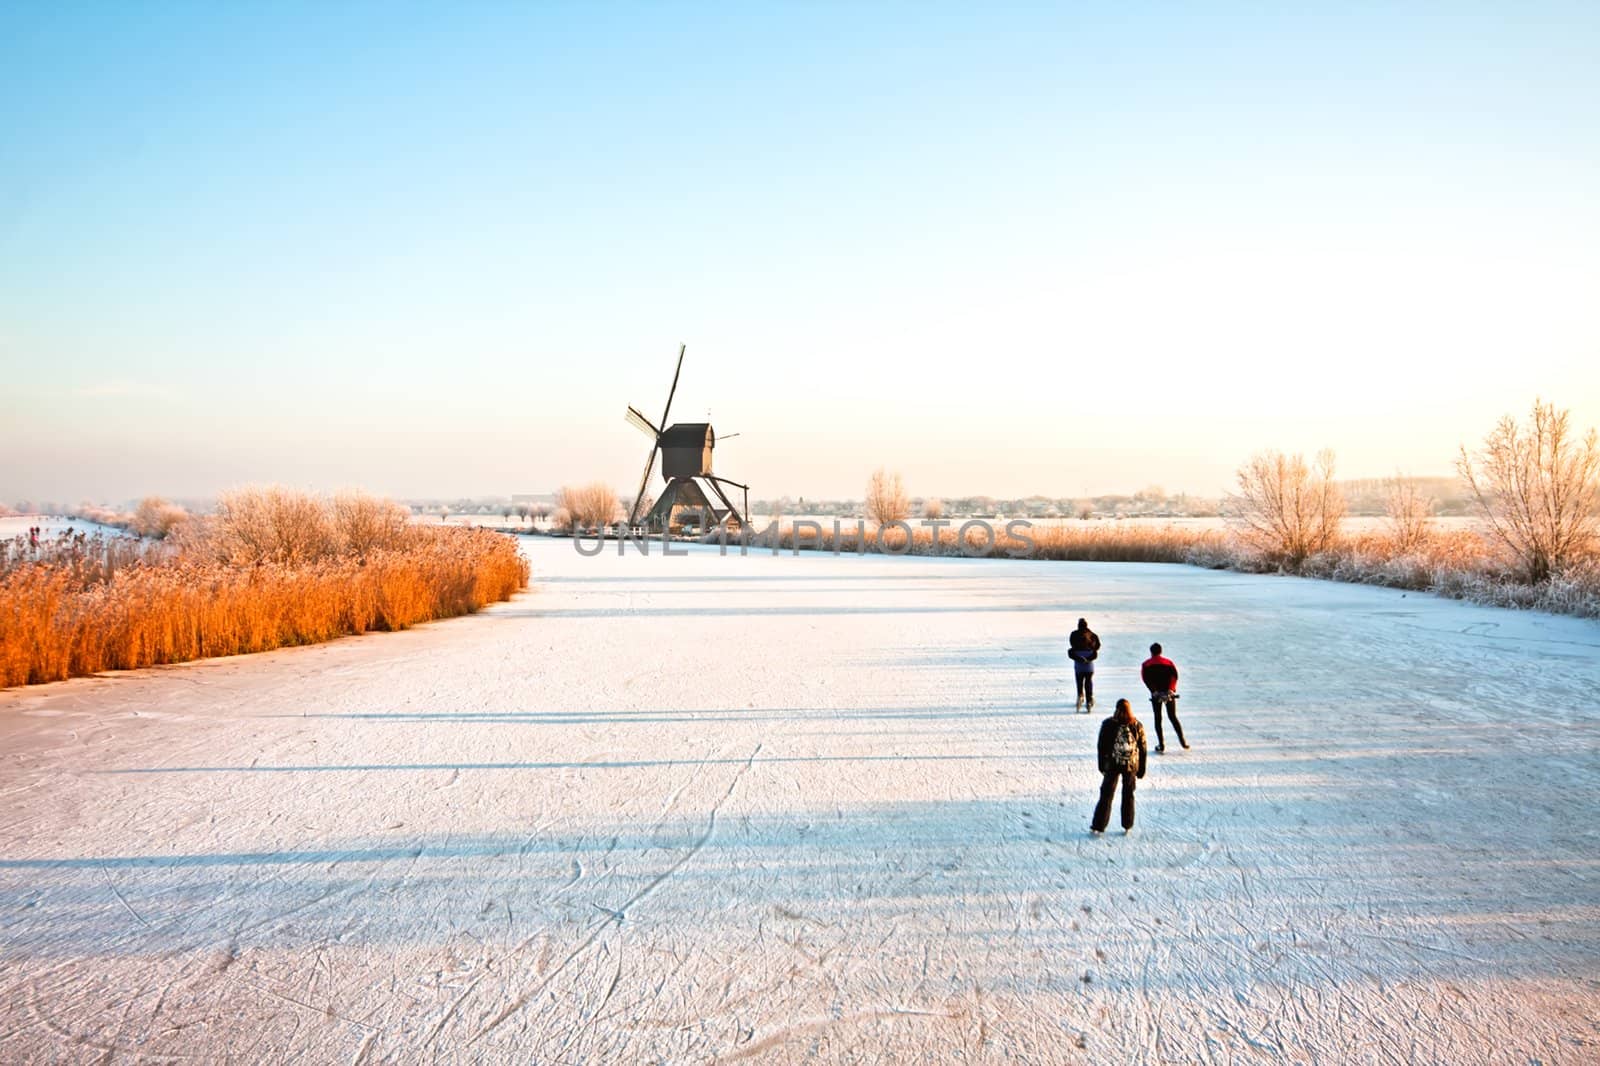 Ice skating at Kinderdijk in the Netherlands by devy